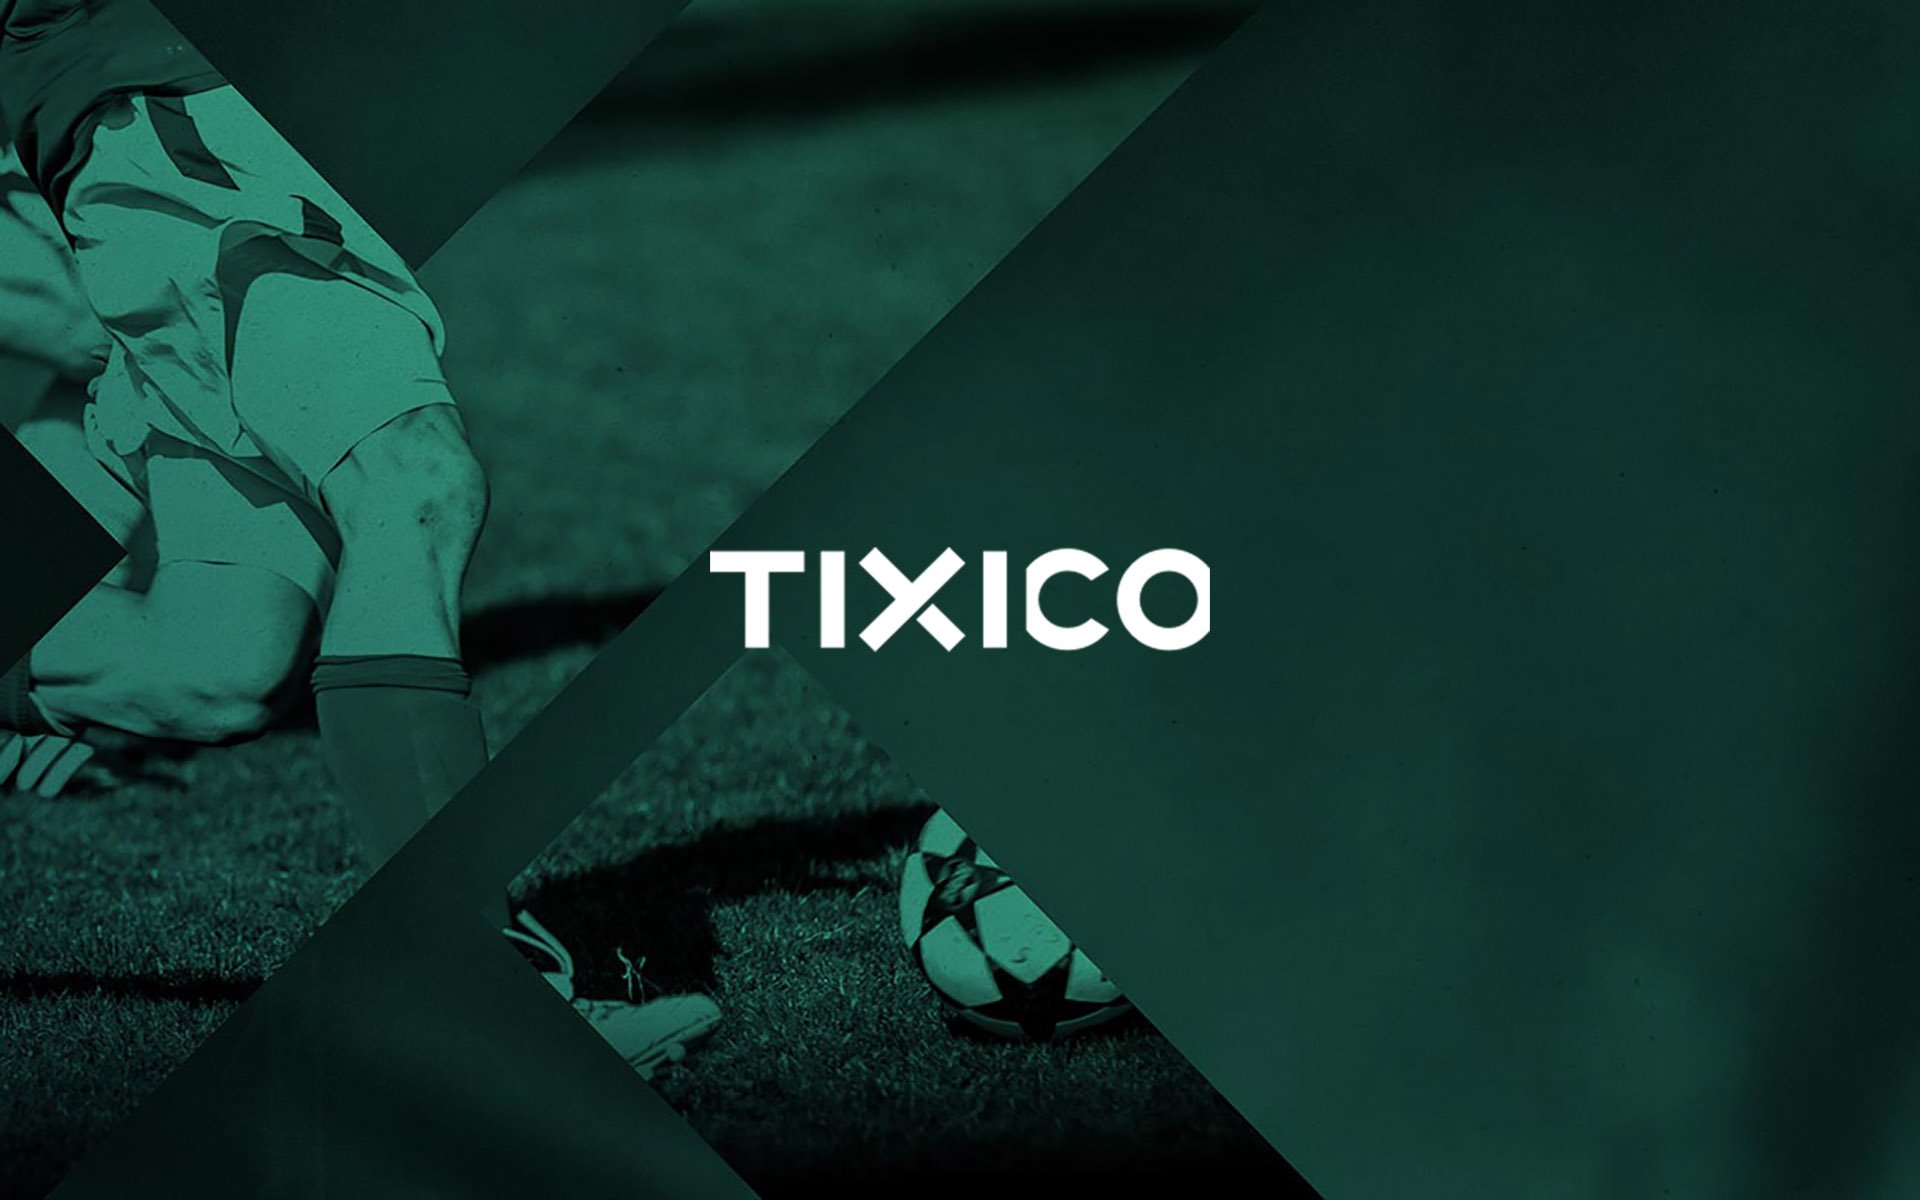 Tixico Readies for Impending ICO Pre-Sale – New Event Ticketing Platform Based On The Blockchain Instantly Adds A New Paradigm To The Event Ticketing Industry